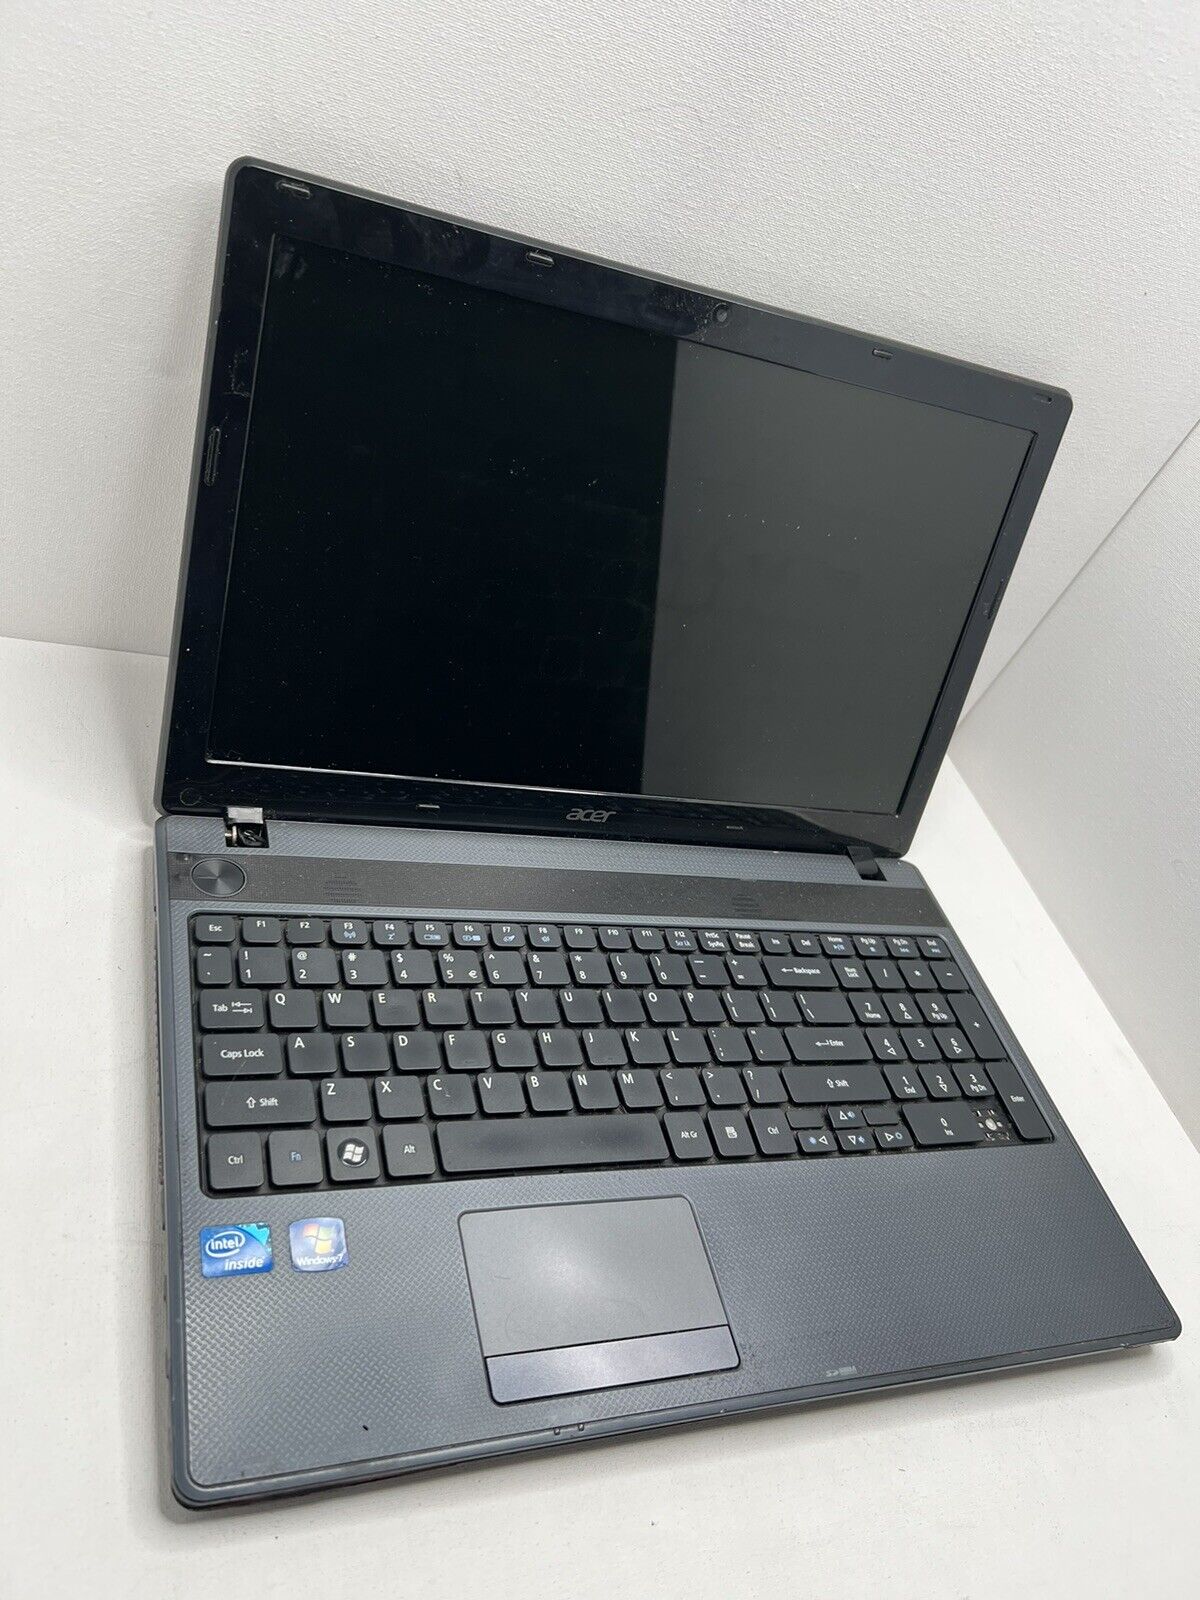 FOR PARTS ACER ASPIRE 5349 Laptop Intel Celeron, HDD 320 GB, RAM 2 GB  *AS IS*